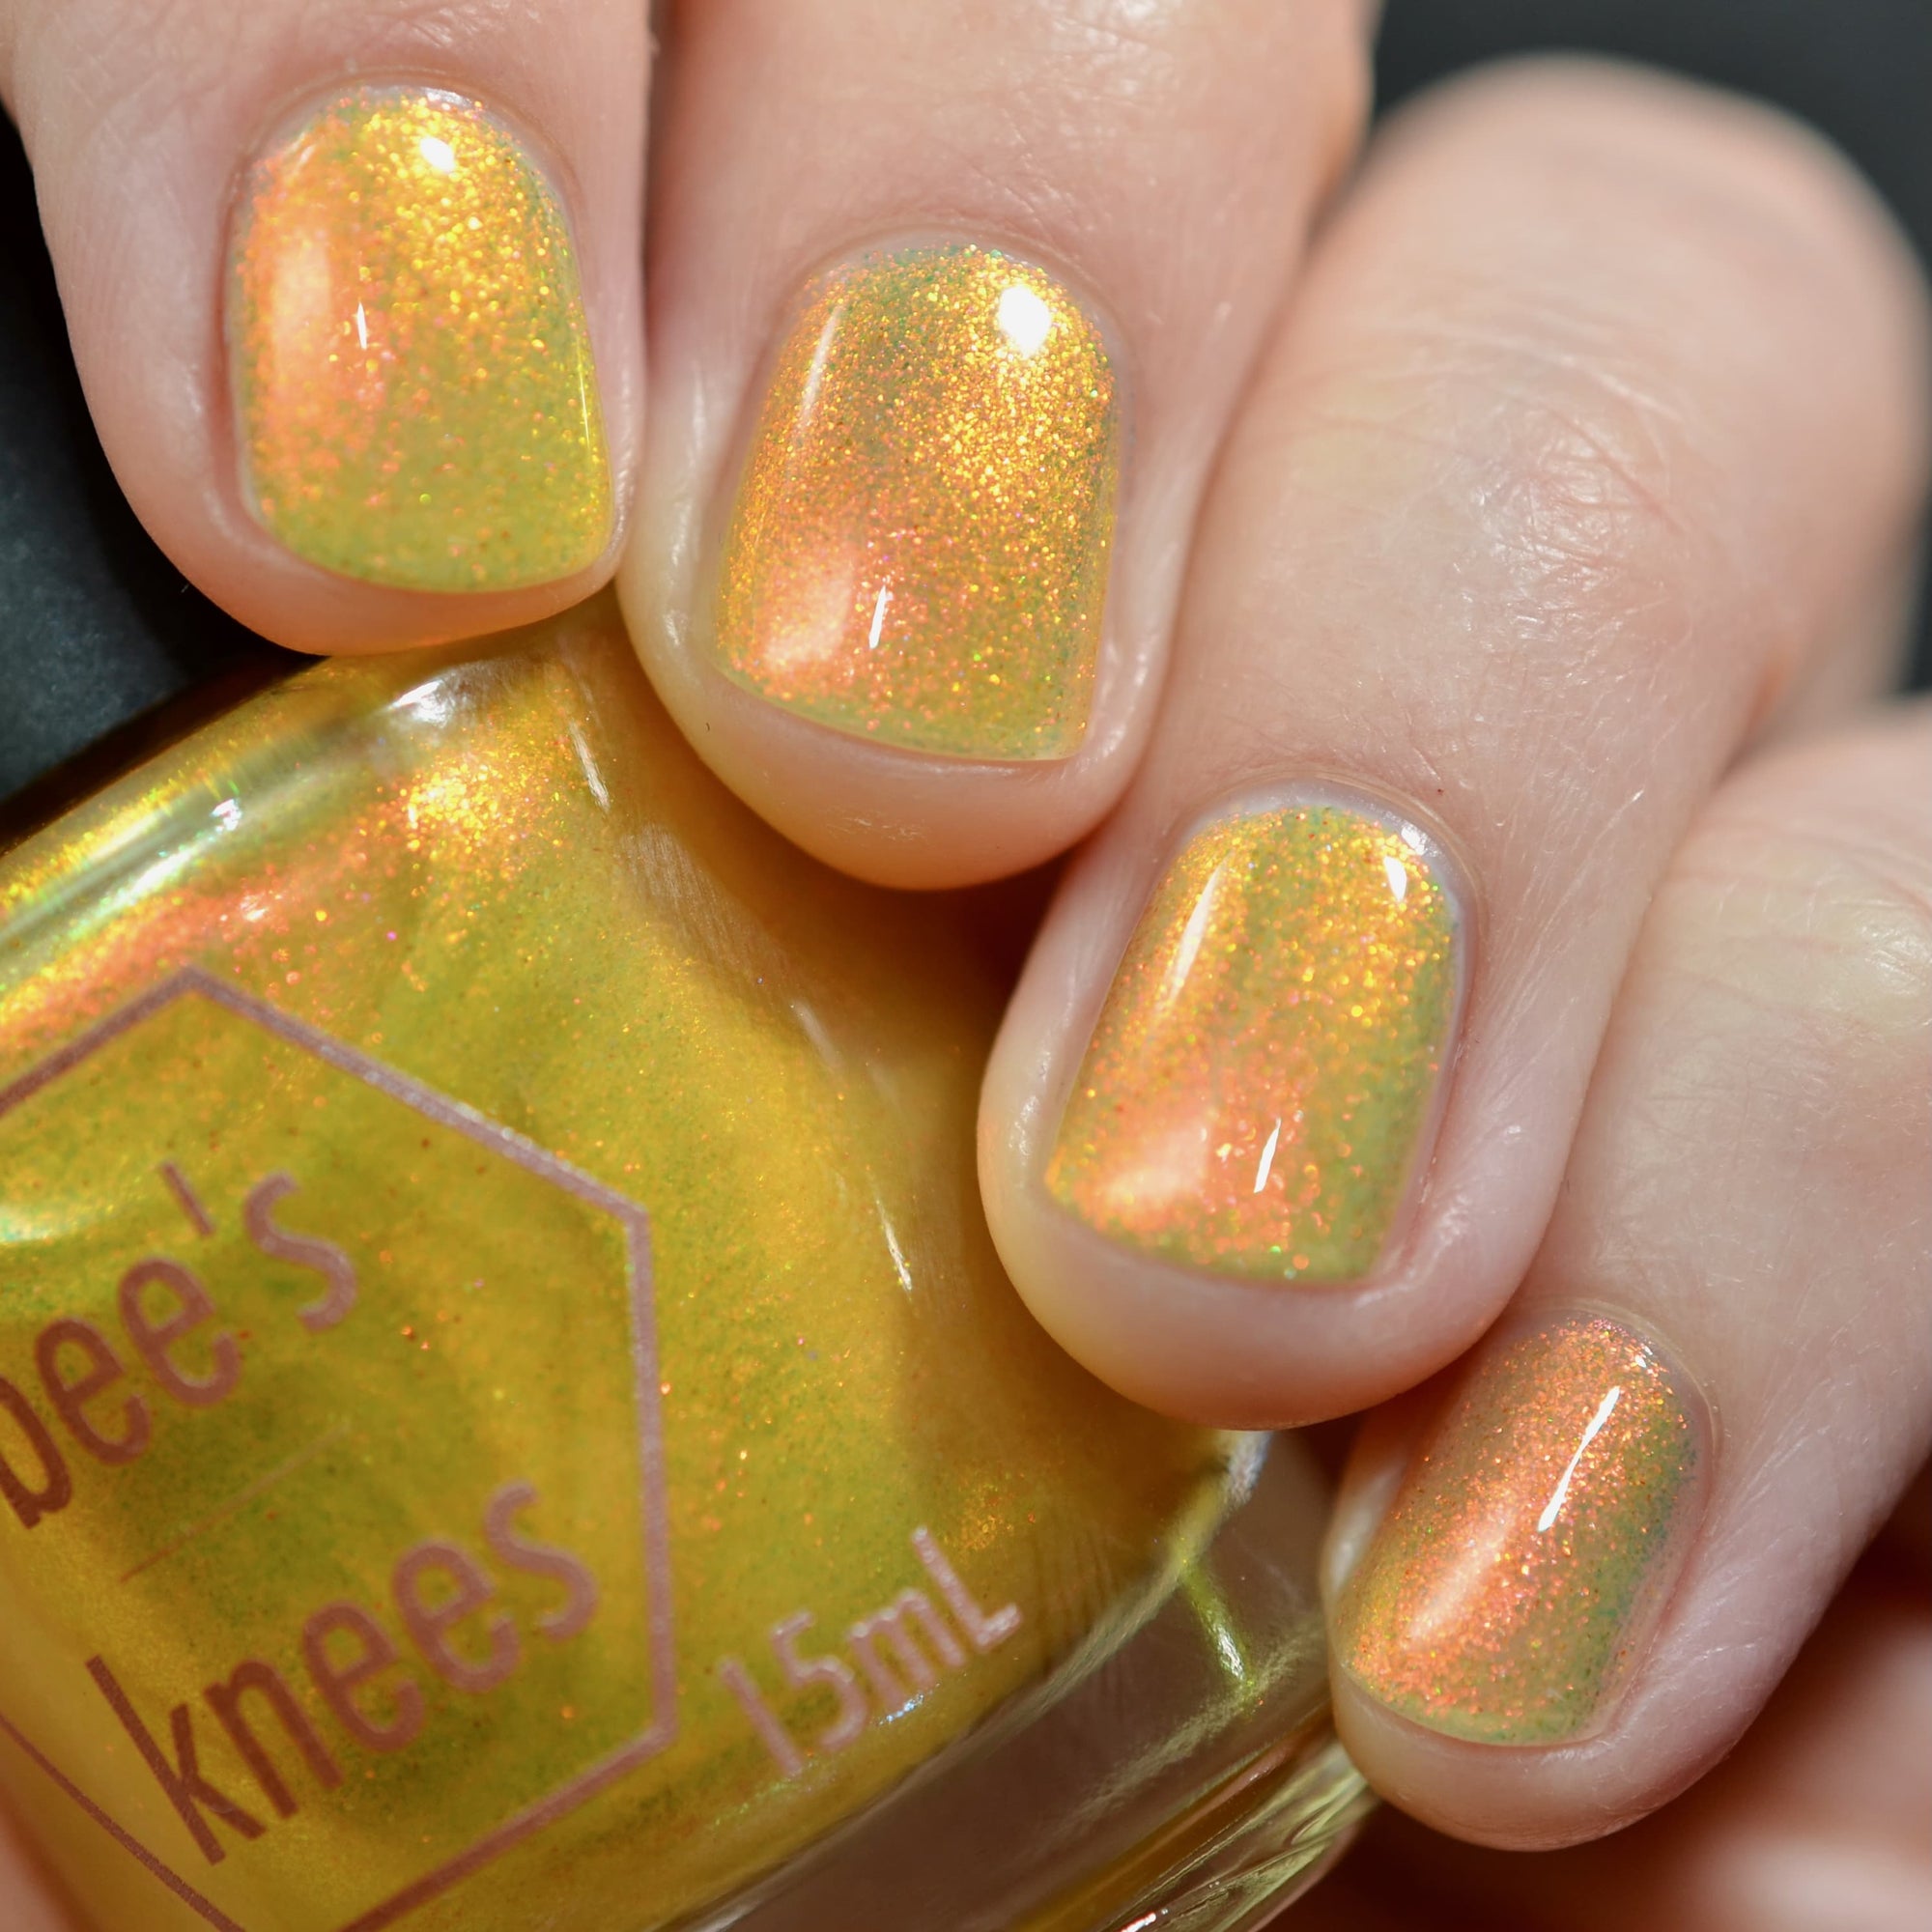 *PRE-ORDER* Bee's Knees Lacquer - Sunbird